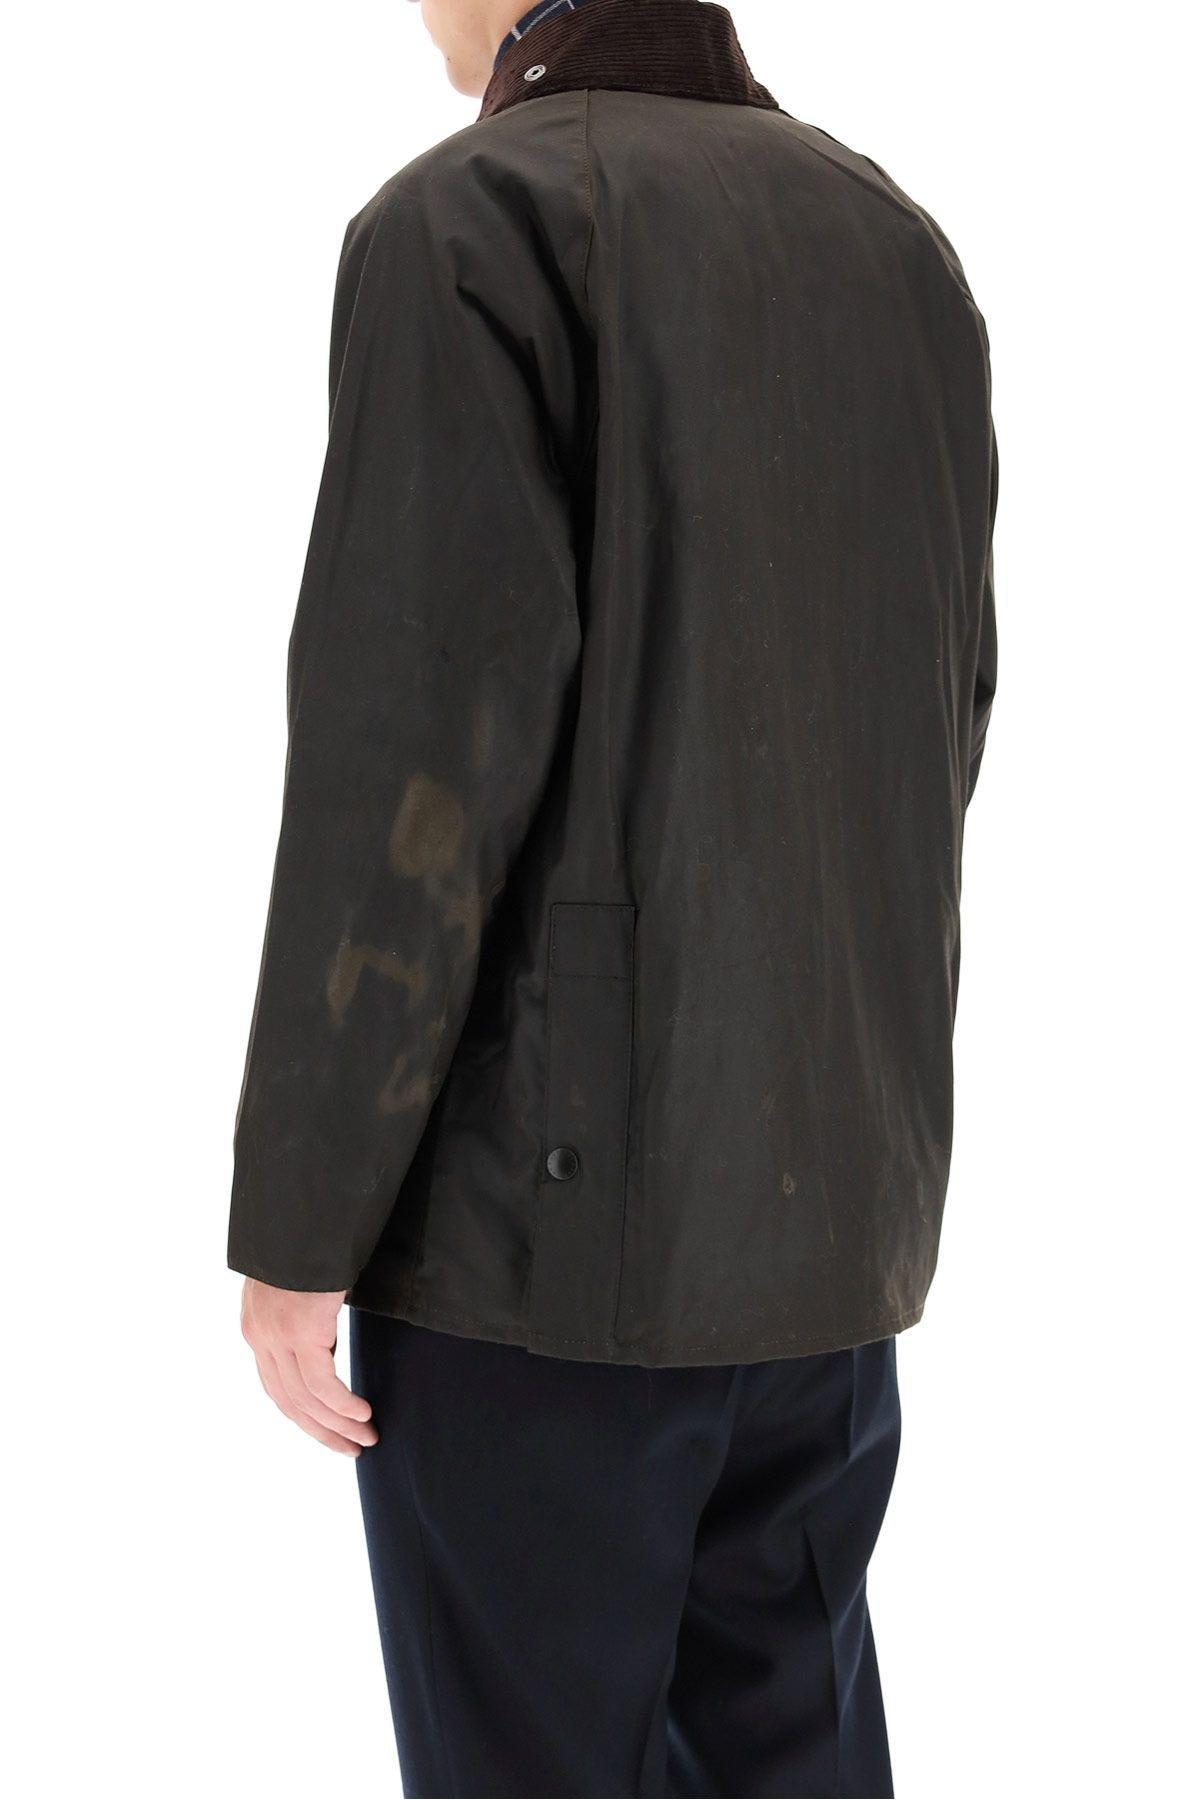 Barbour Classic Bedal Jacket In Waxed Cotton in Black for Men | Lyst